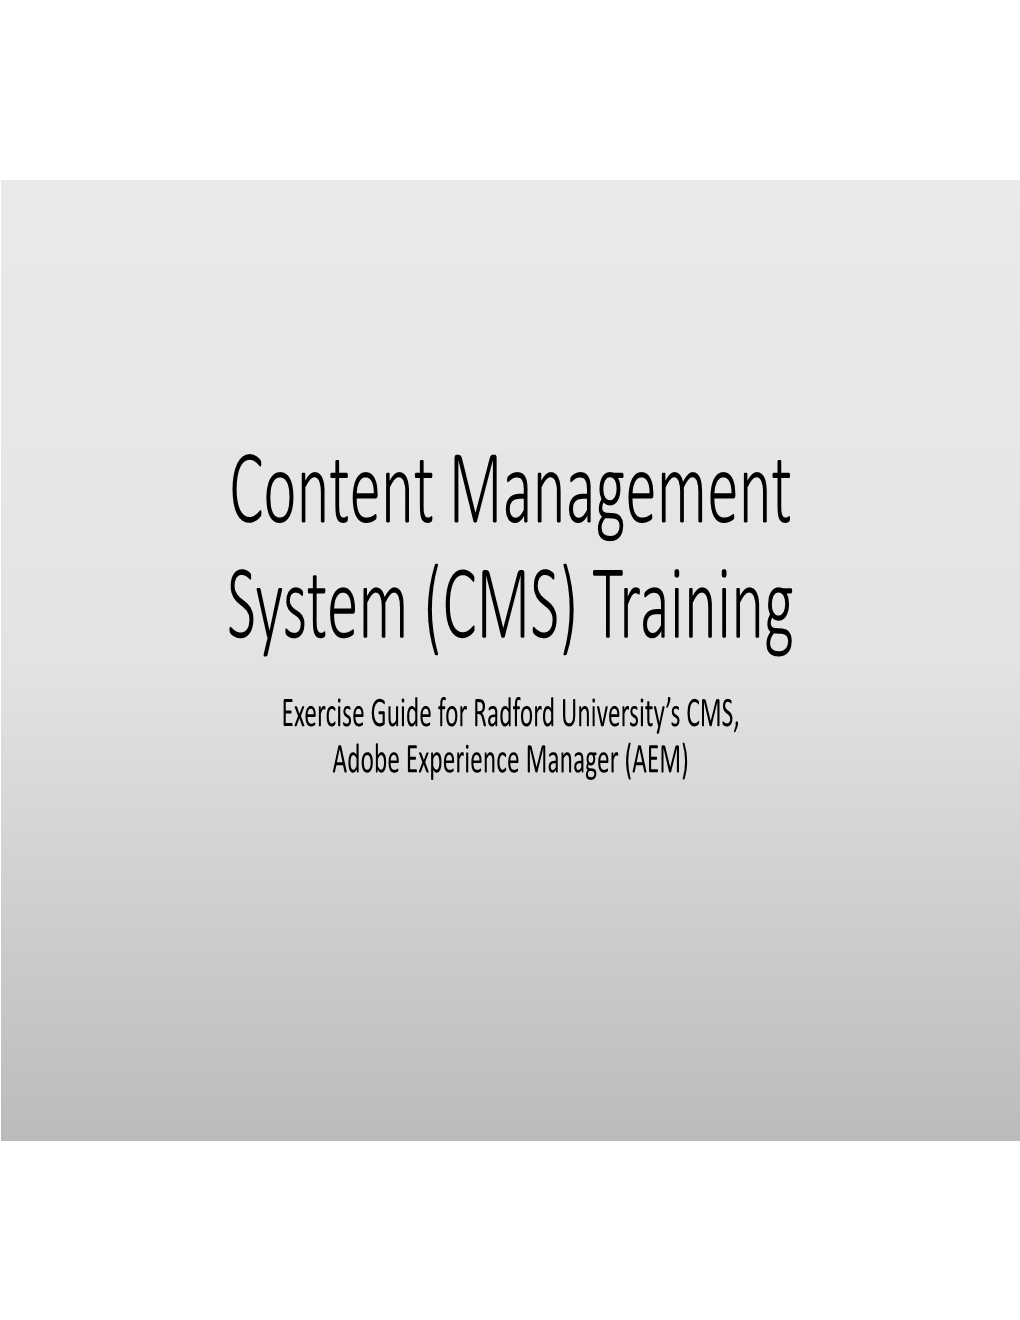 Content Management System (CMS) Training Exercise Guide for Radford University’S CMS, Adobe Experience Manager (AEM) Access the Training Environment